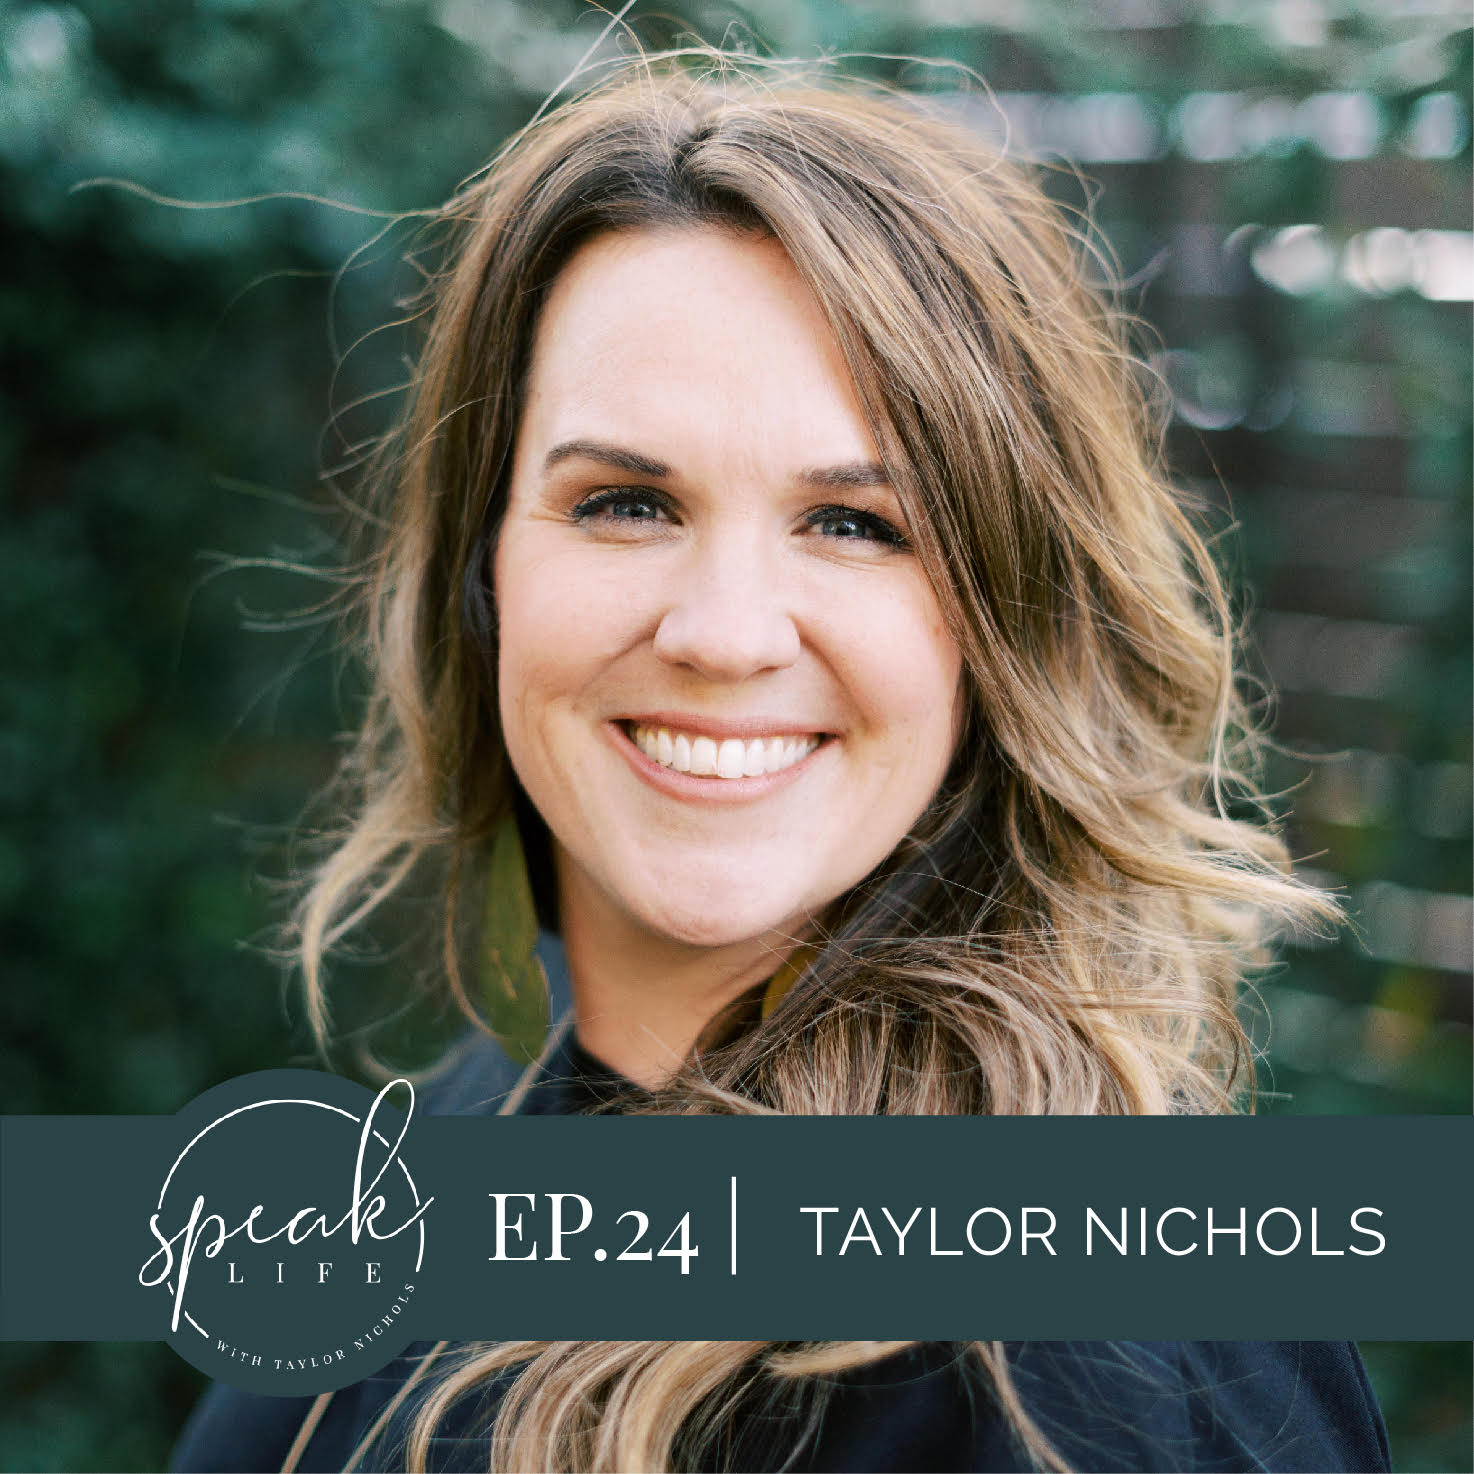 Ep. 24. Taylor Nichols – From ‘curiosity’ to ‘connection’